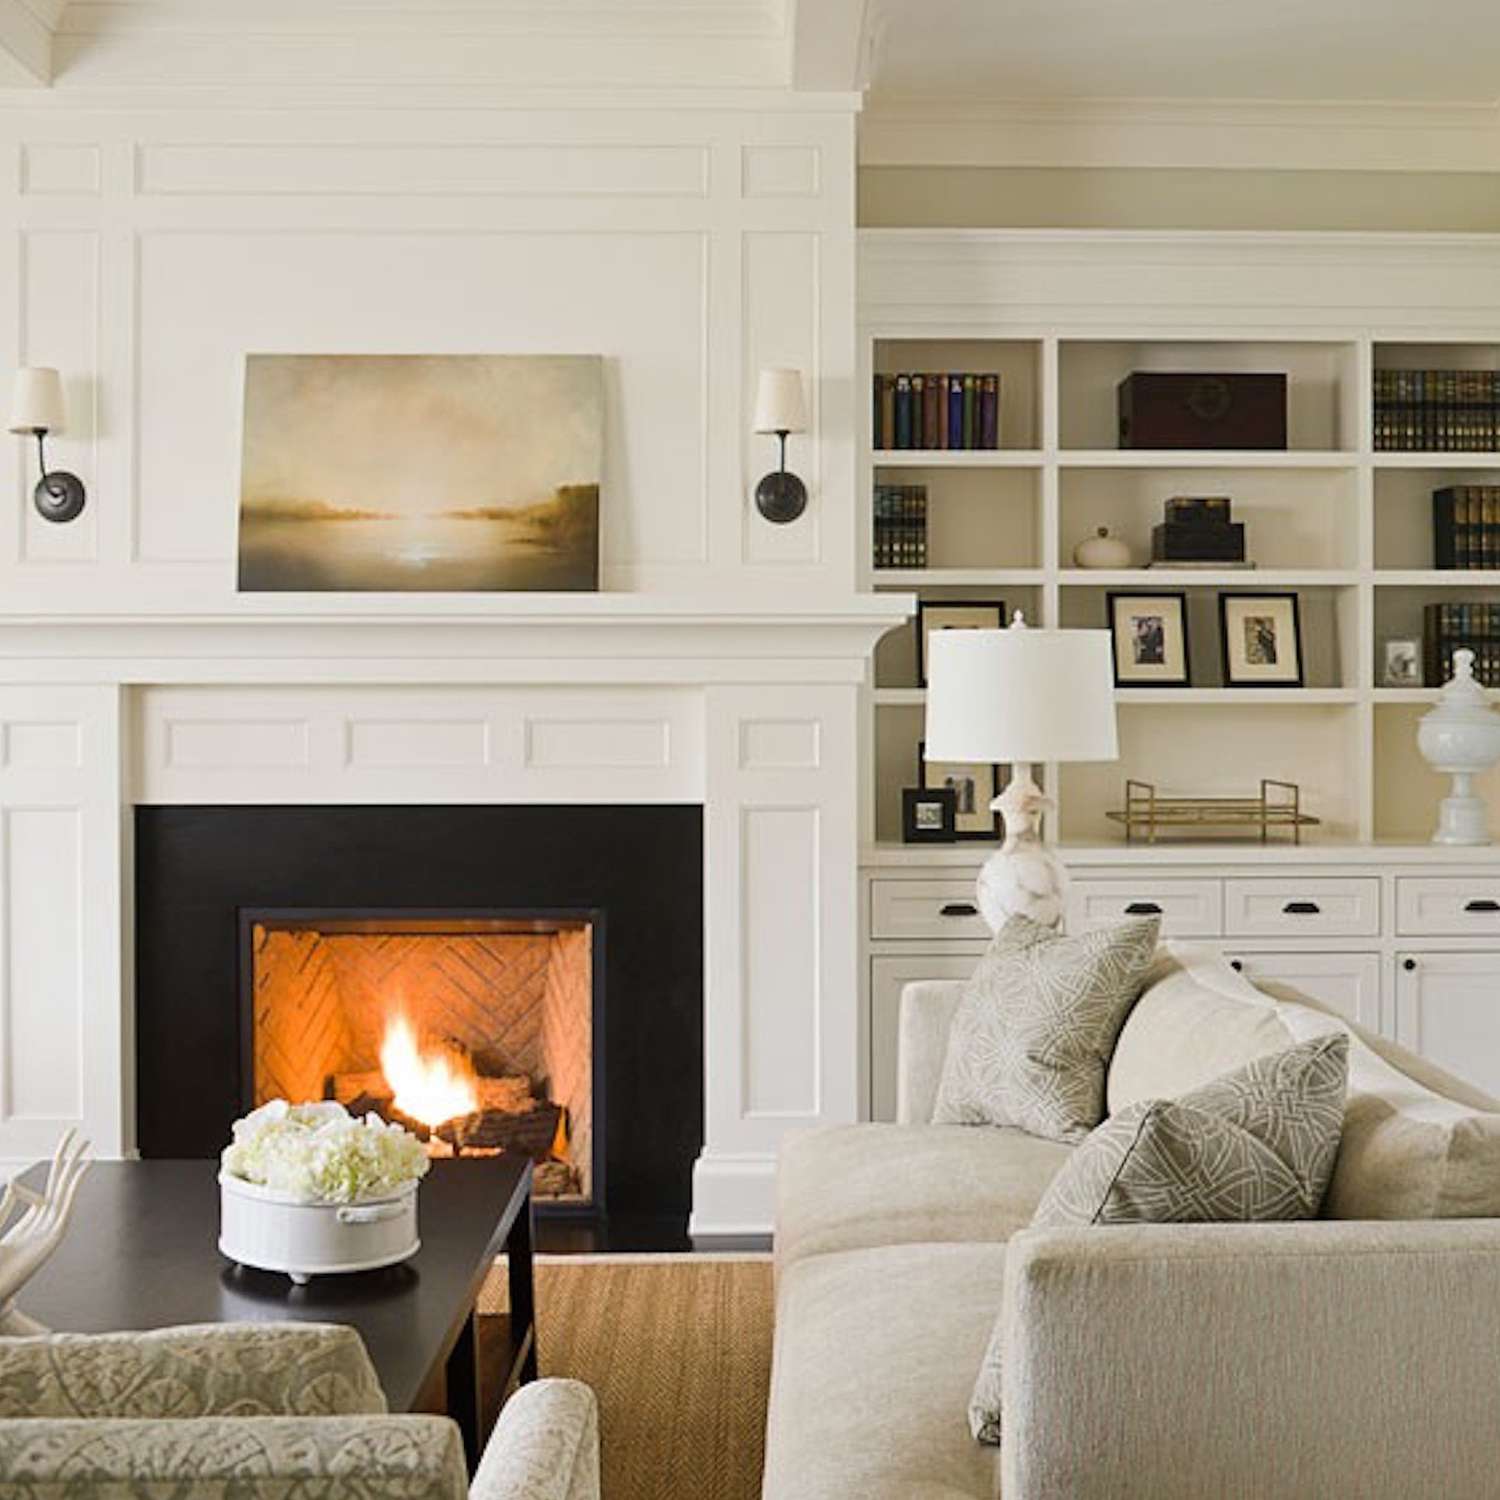 3 Look to more neutral grounding accent shades